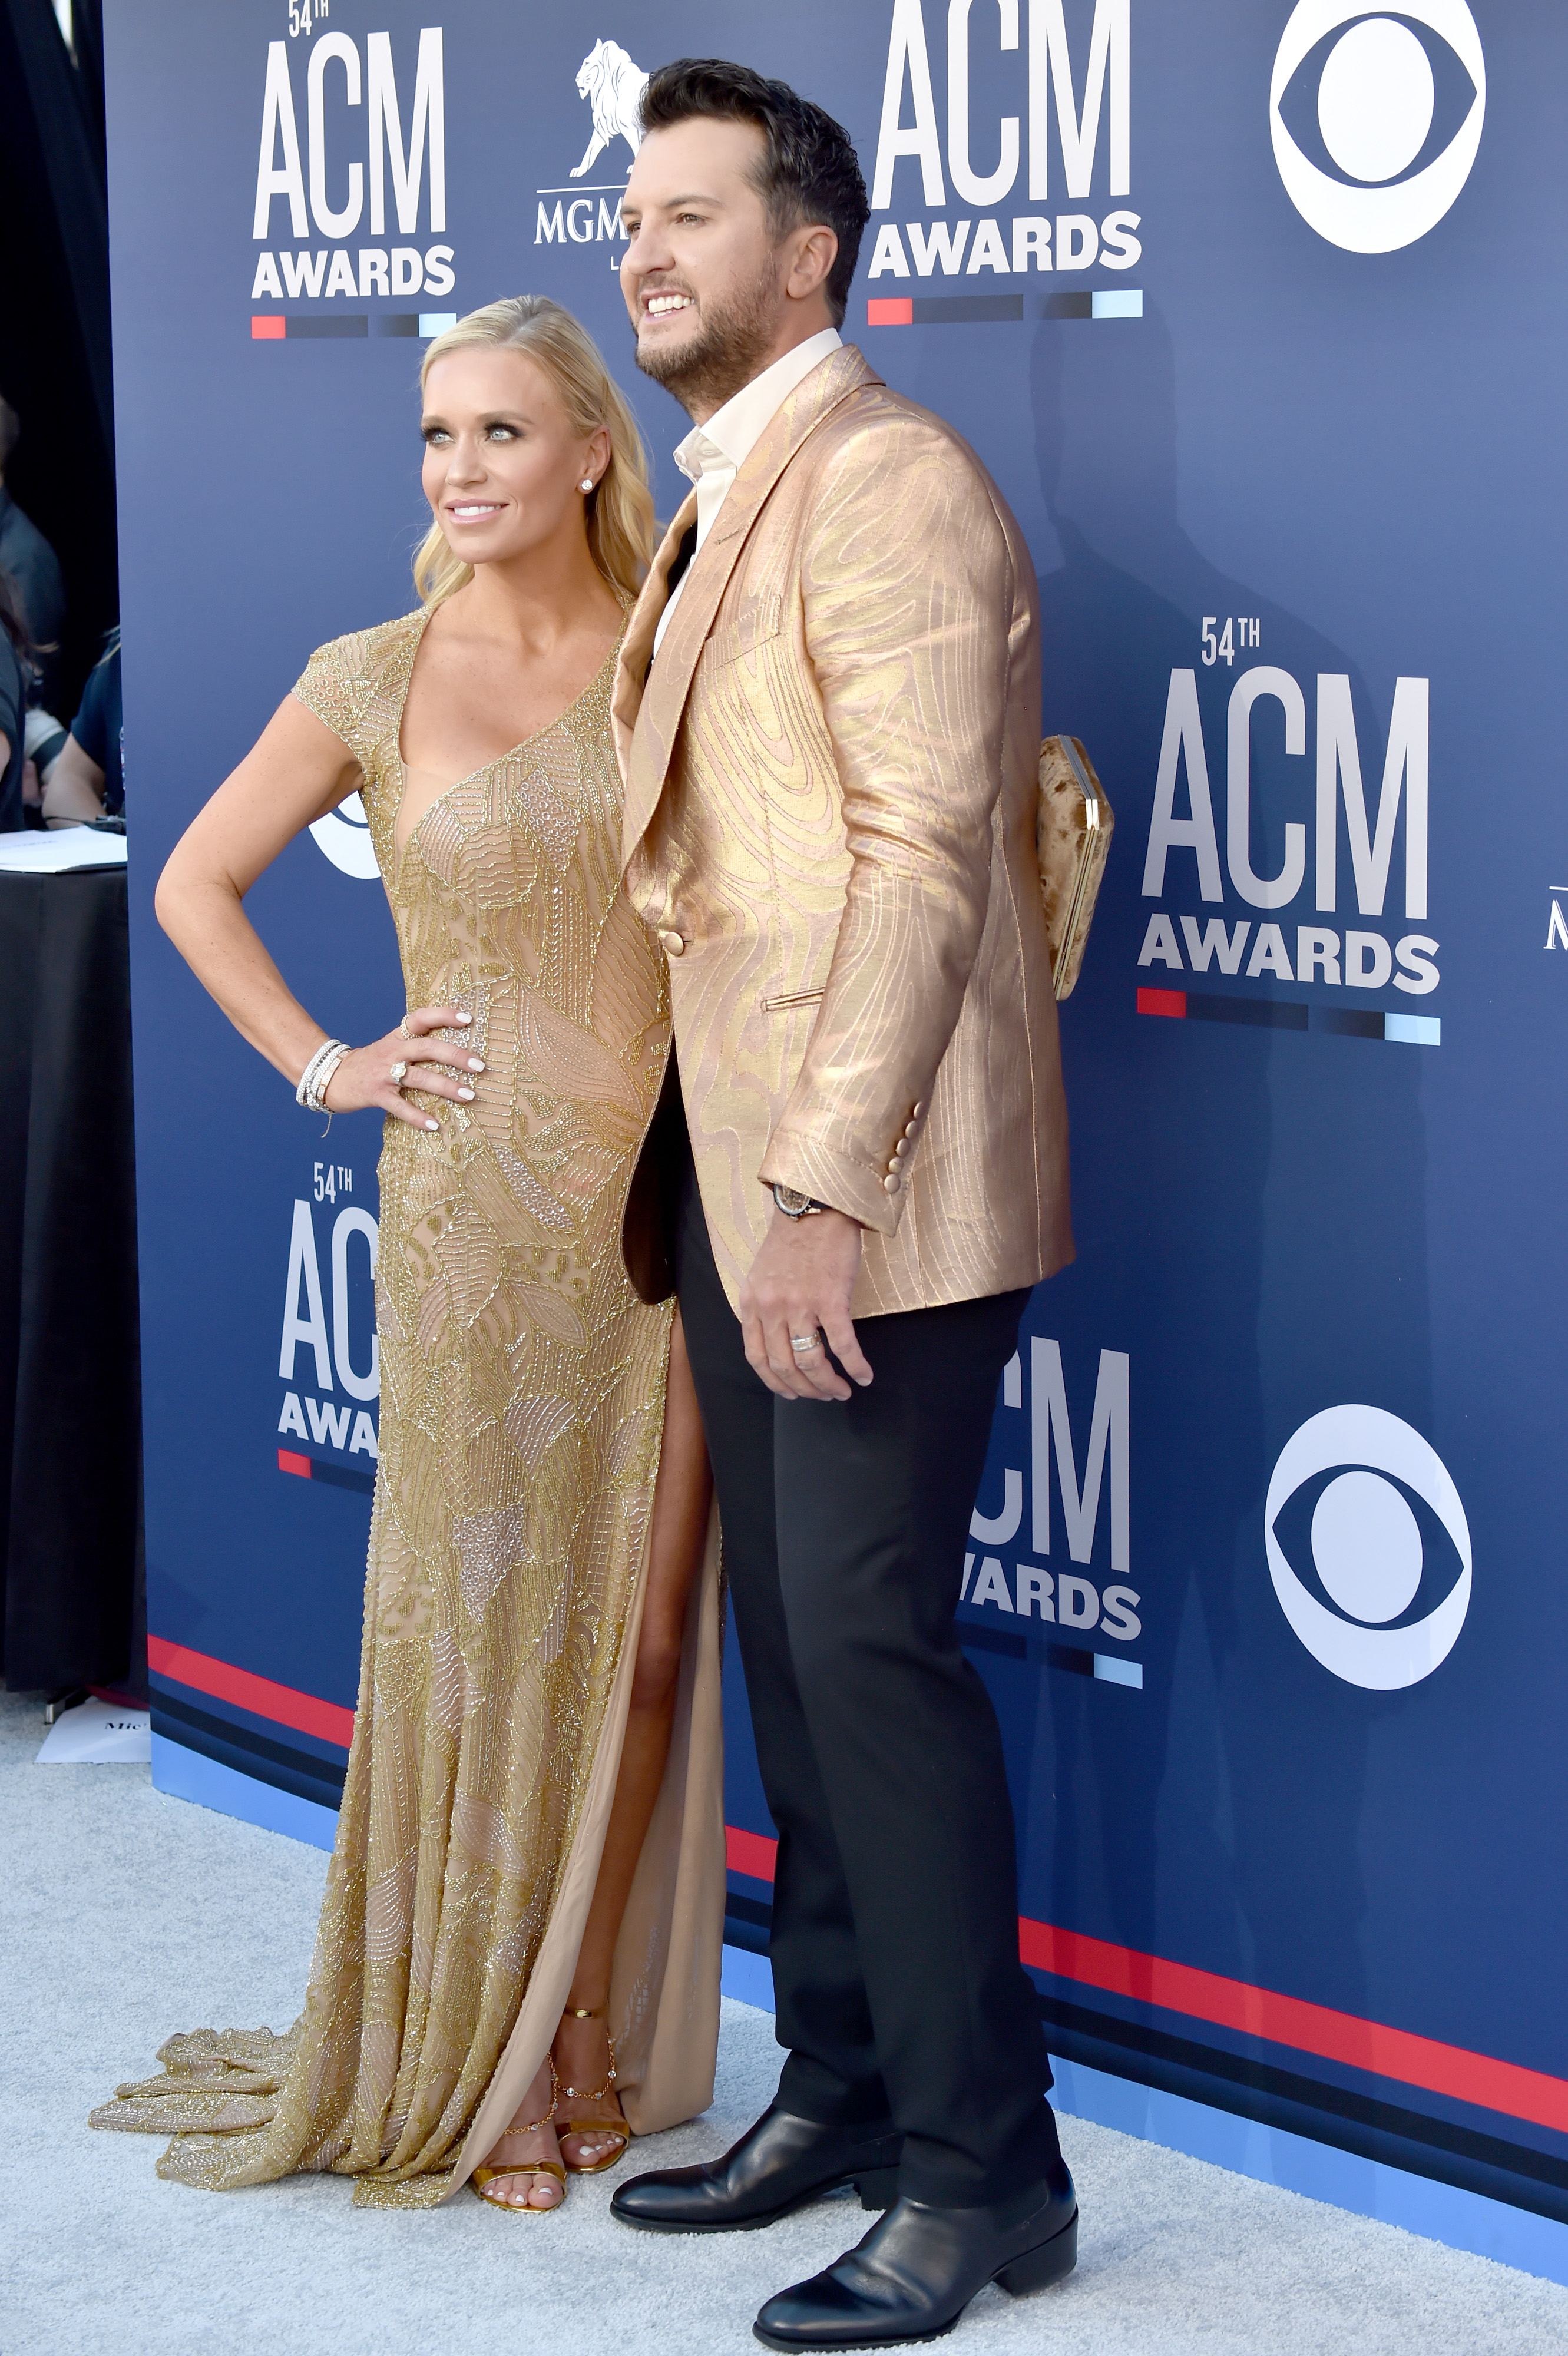 ACM Awards 2019 red carpet: See all the arrivals